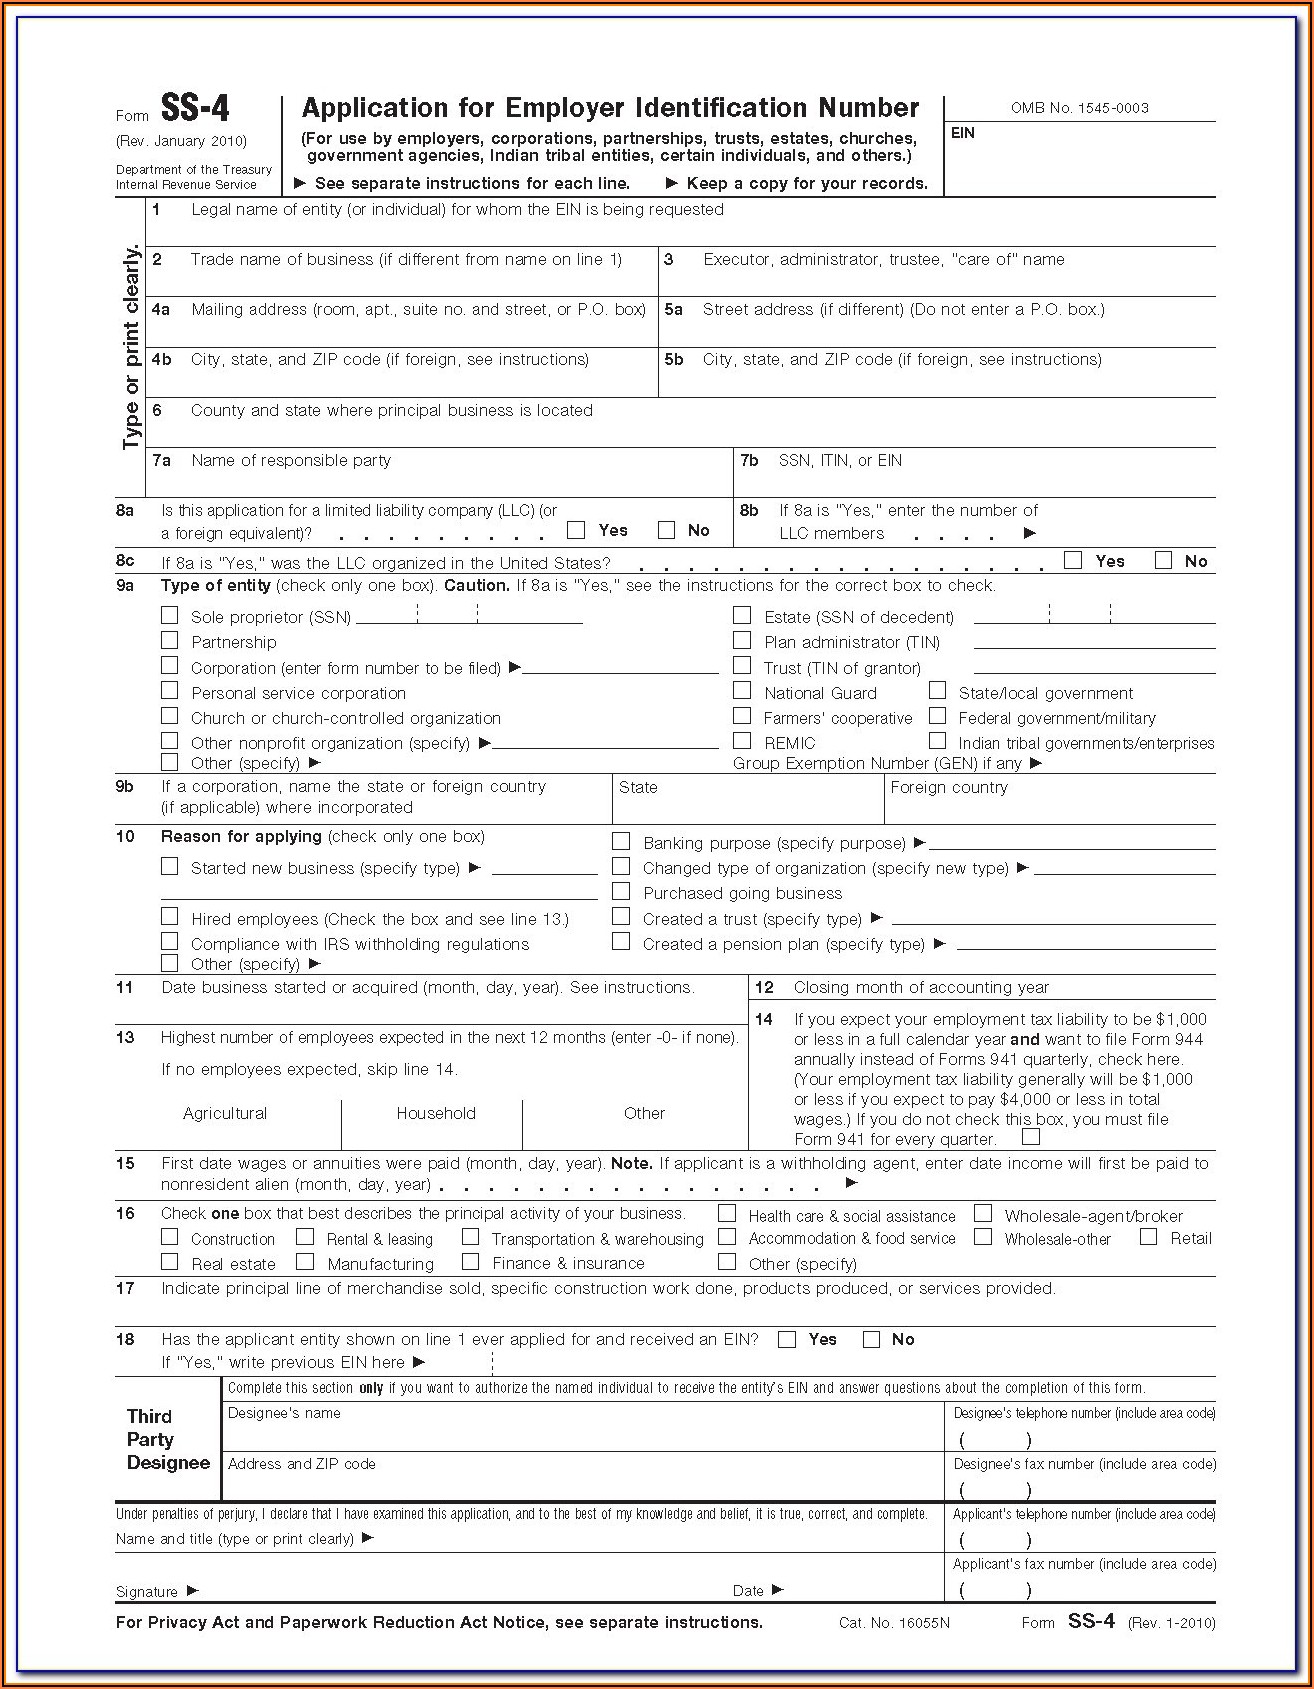 Irs Forms Ss 4 Form Resume Examples n49mjLLYZz